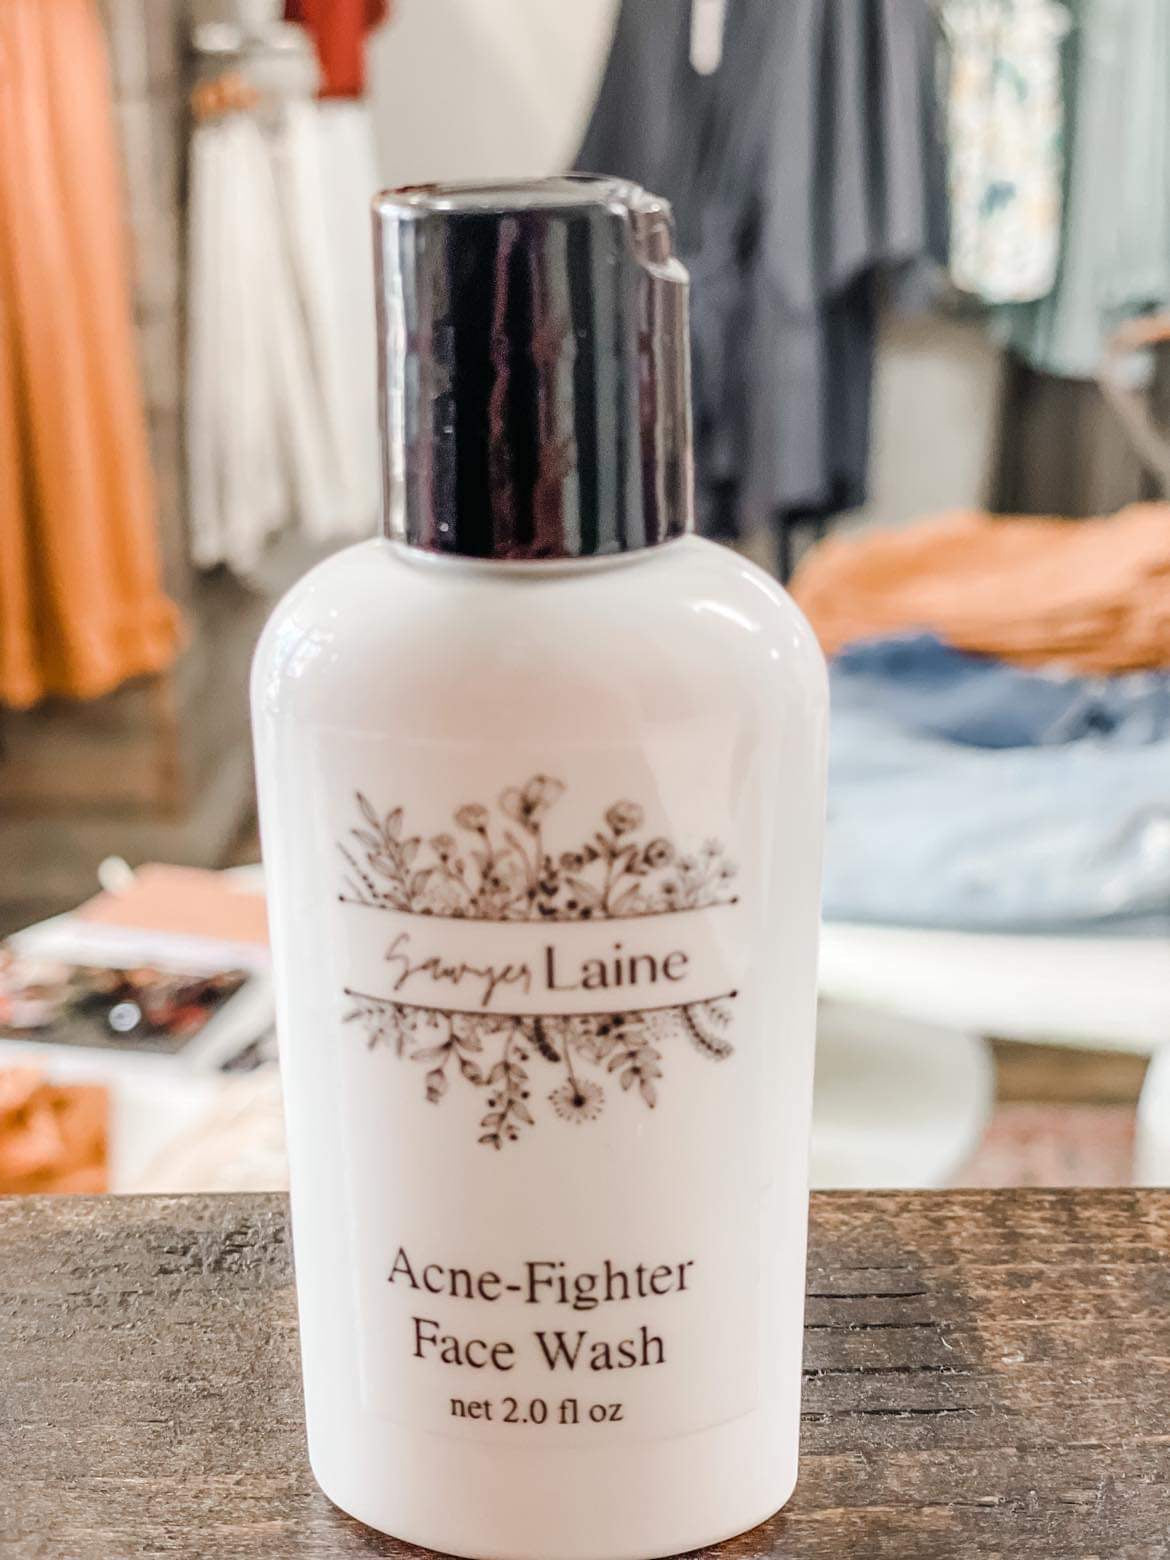 Acne-Fighter Face Wash